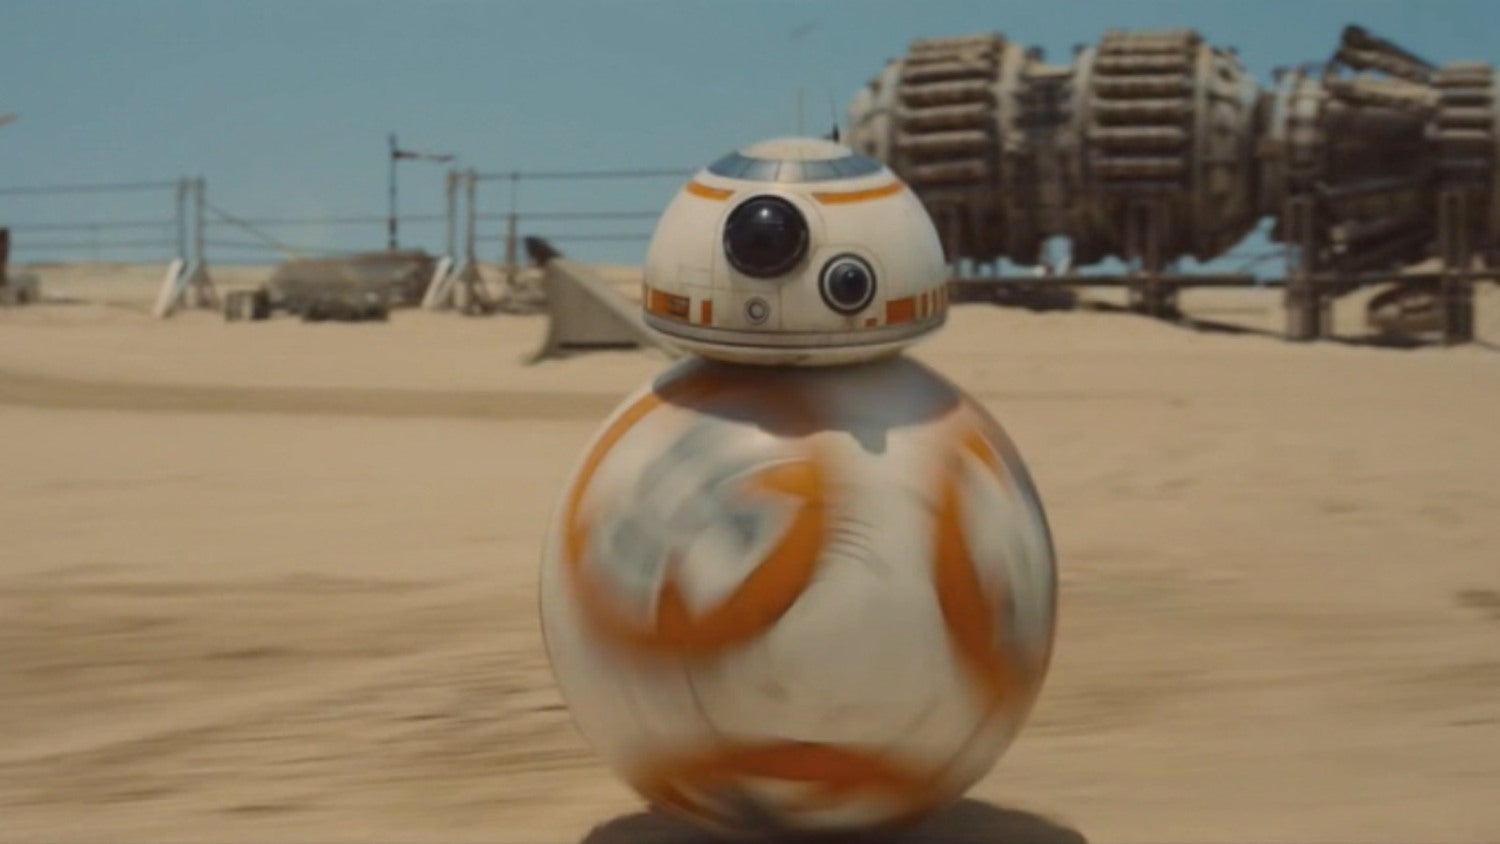 'Star Wars: The Force Awakens’ became the highest grossing film of all time, this week